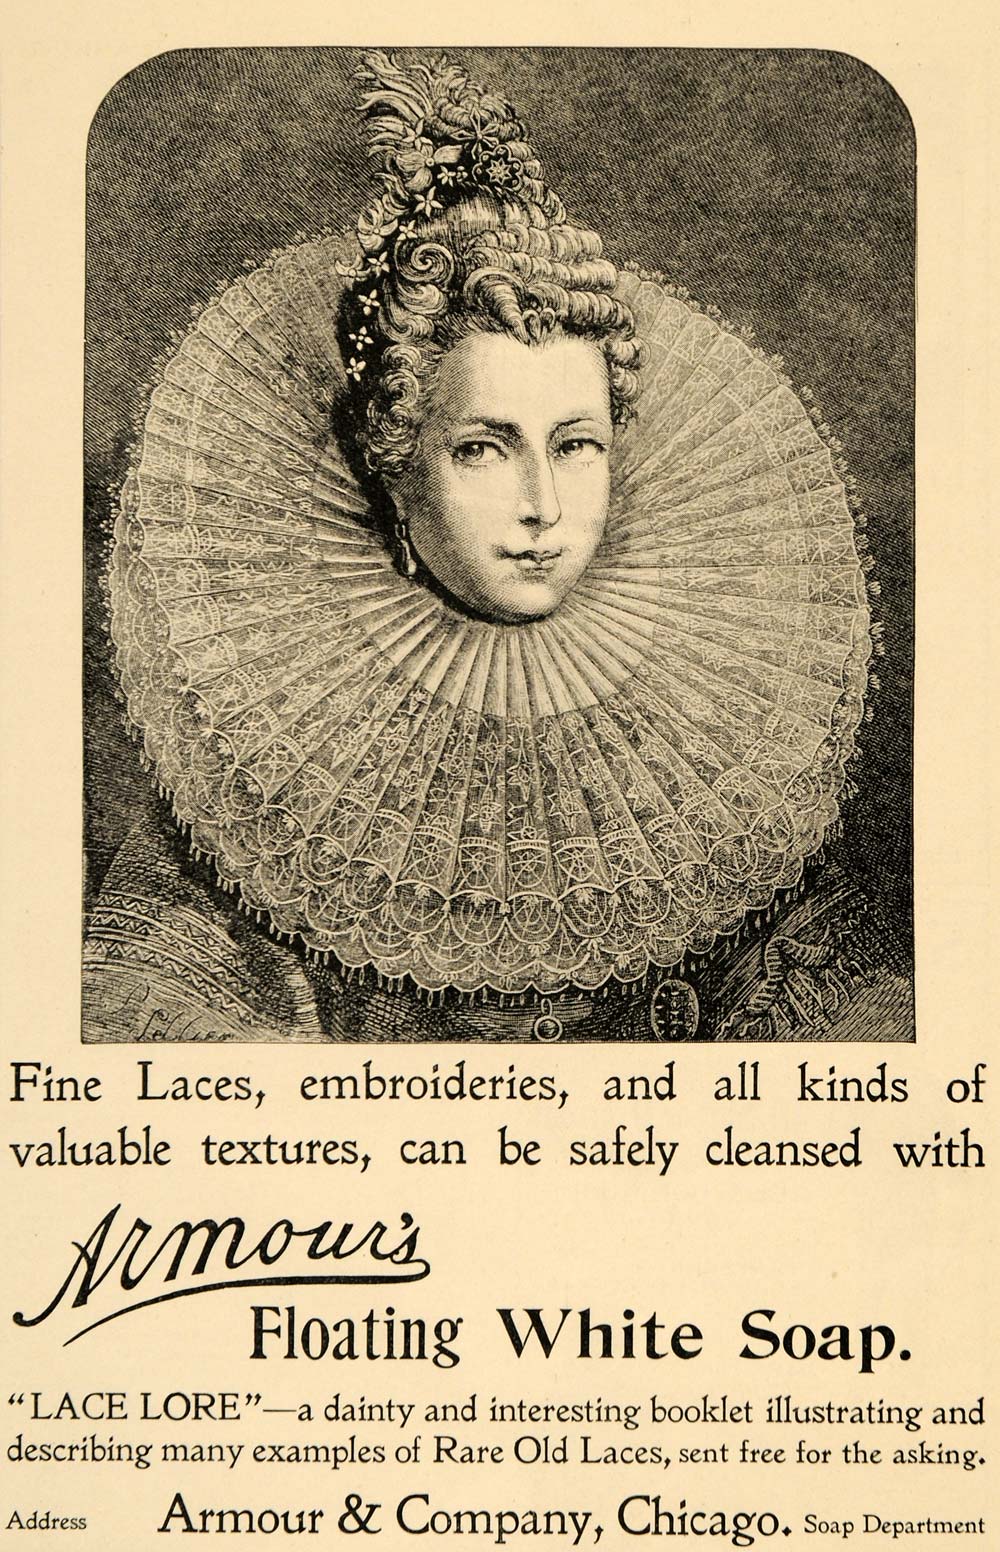 1897 Ad Armour & Company Chicago Floating White Soap - ORIGINAL ADVERTISING LHJ4